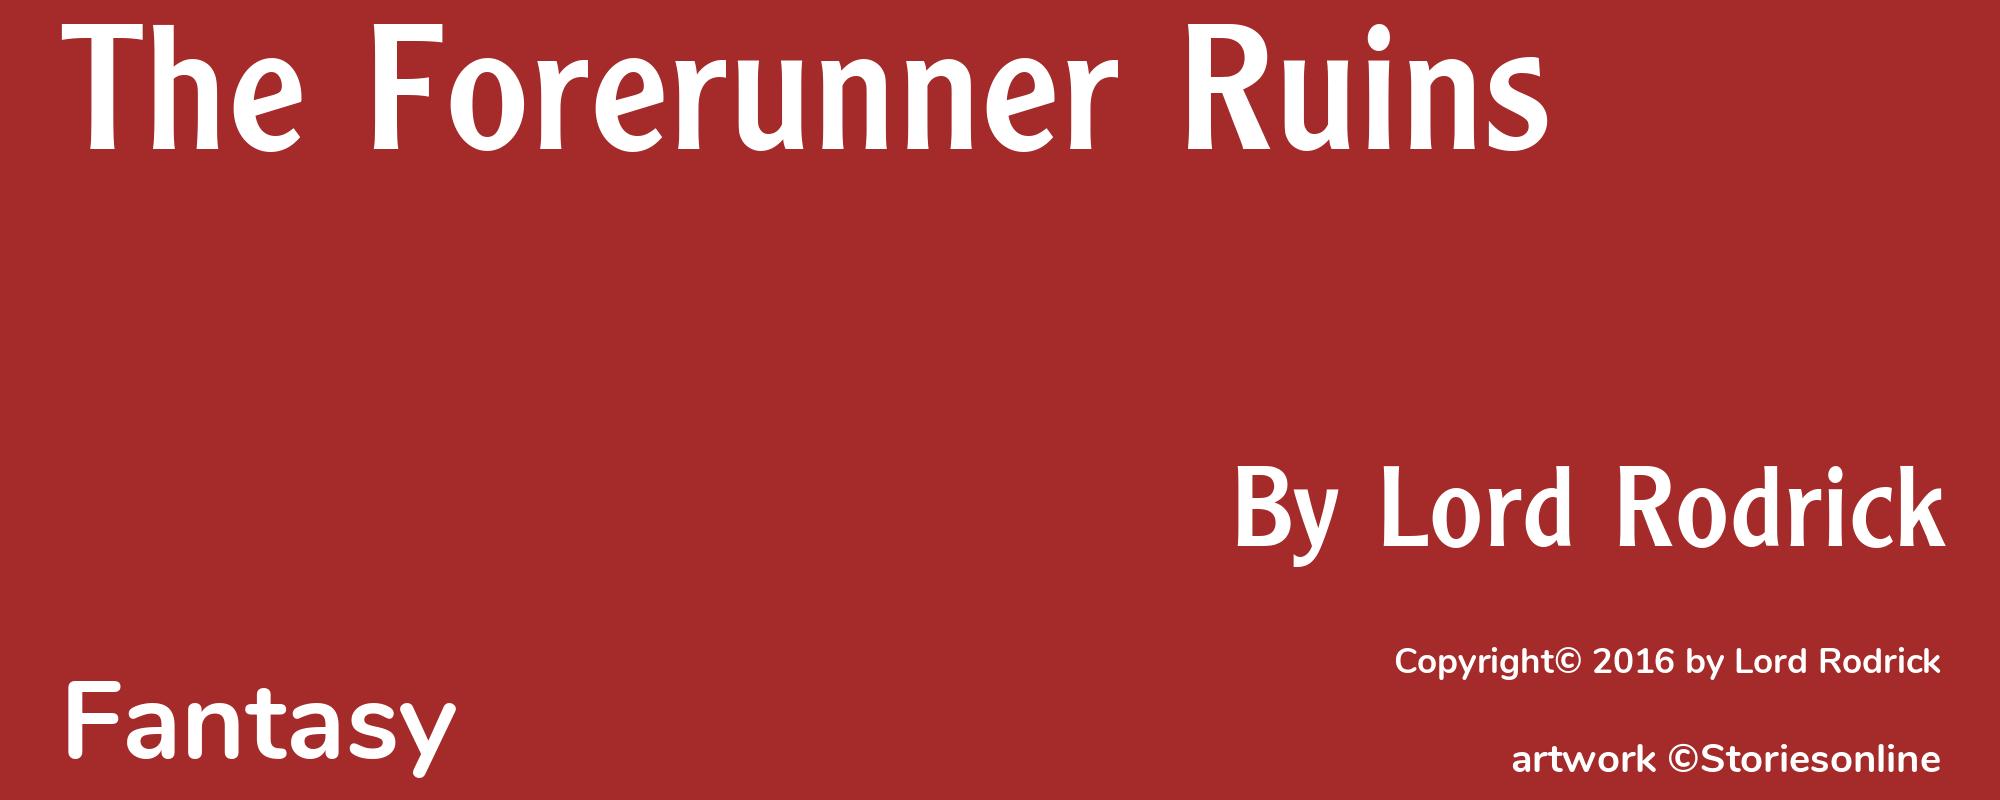 The Forerunner Ruins - Cover